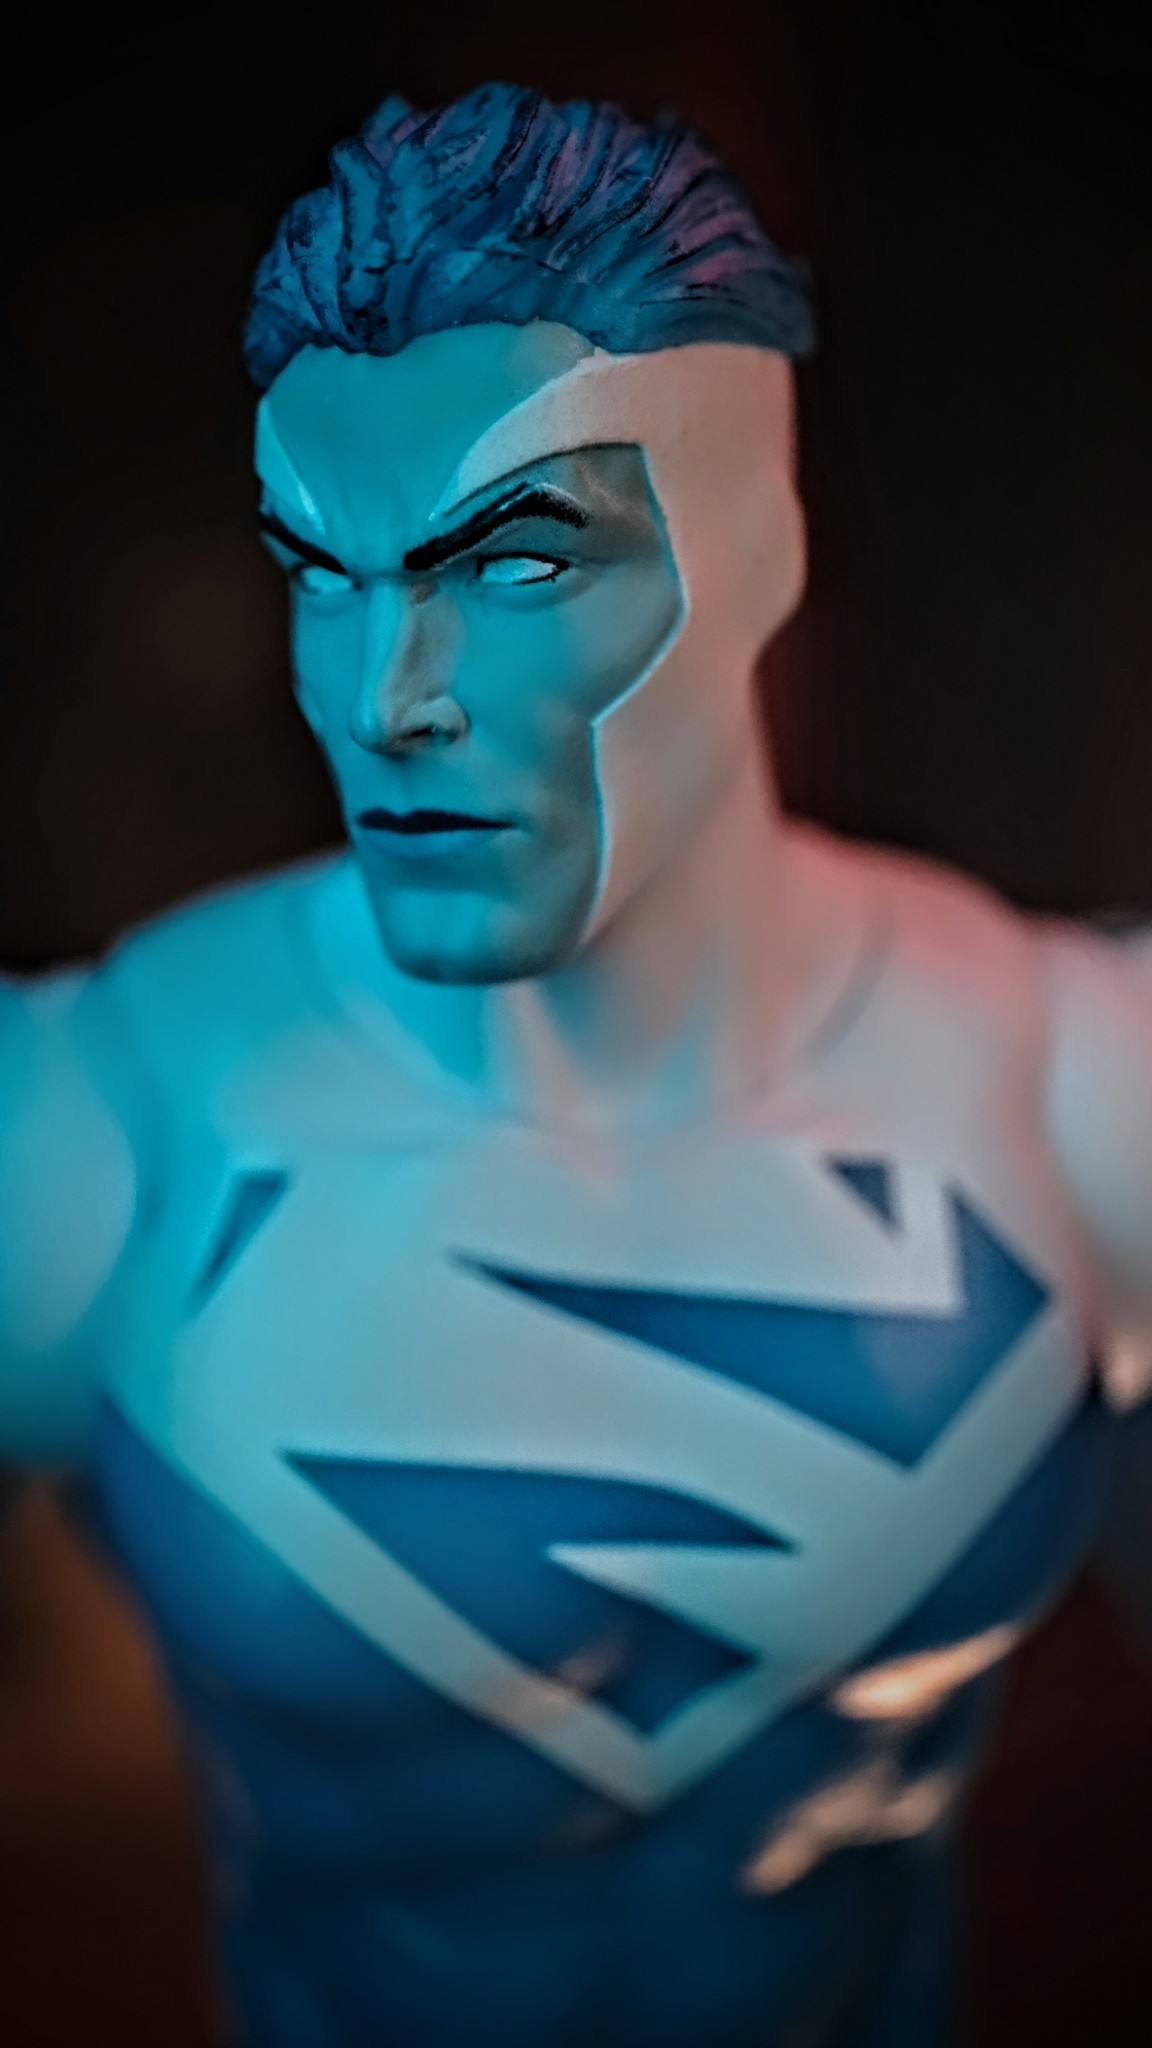 Mcfarlane Toys DC Multiverse Superman Blue & Superman Red(Collect to Build Plastic-Man) Wave Figure Review